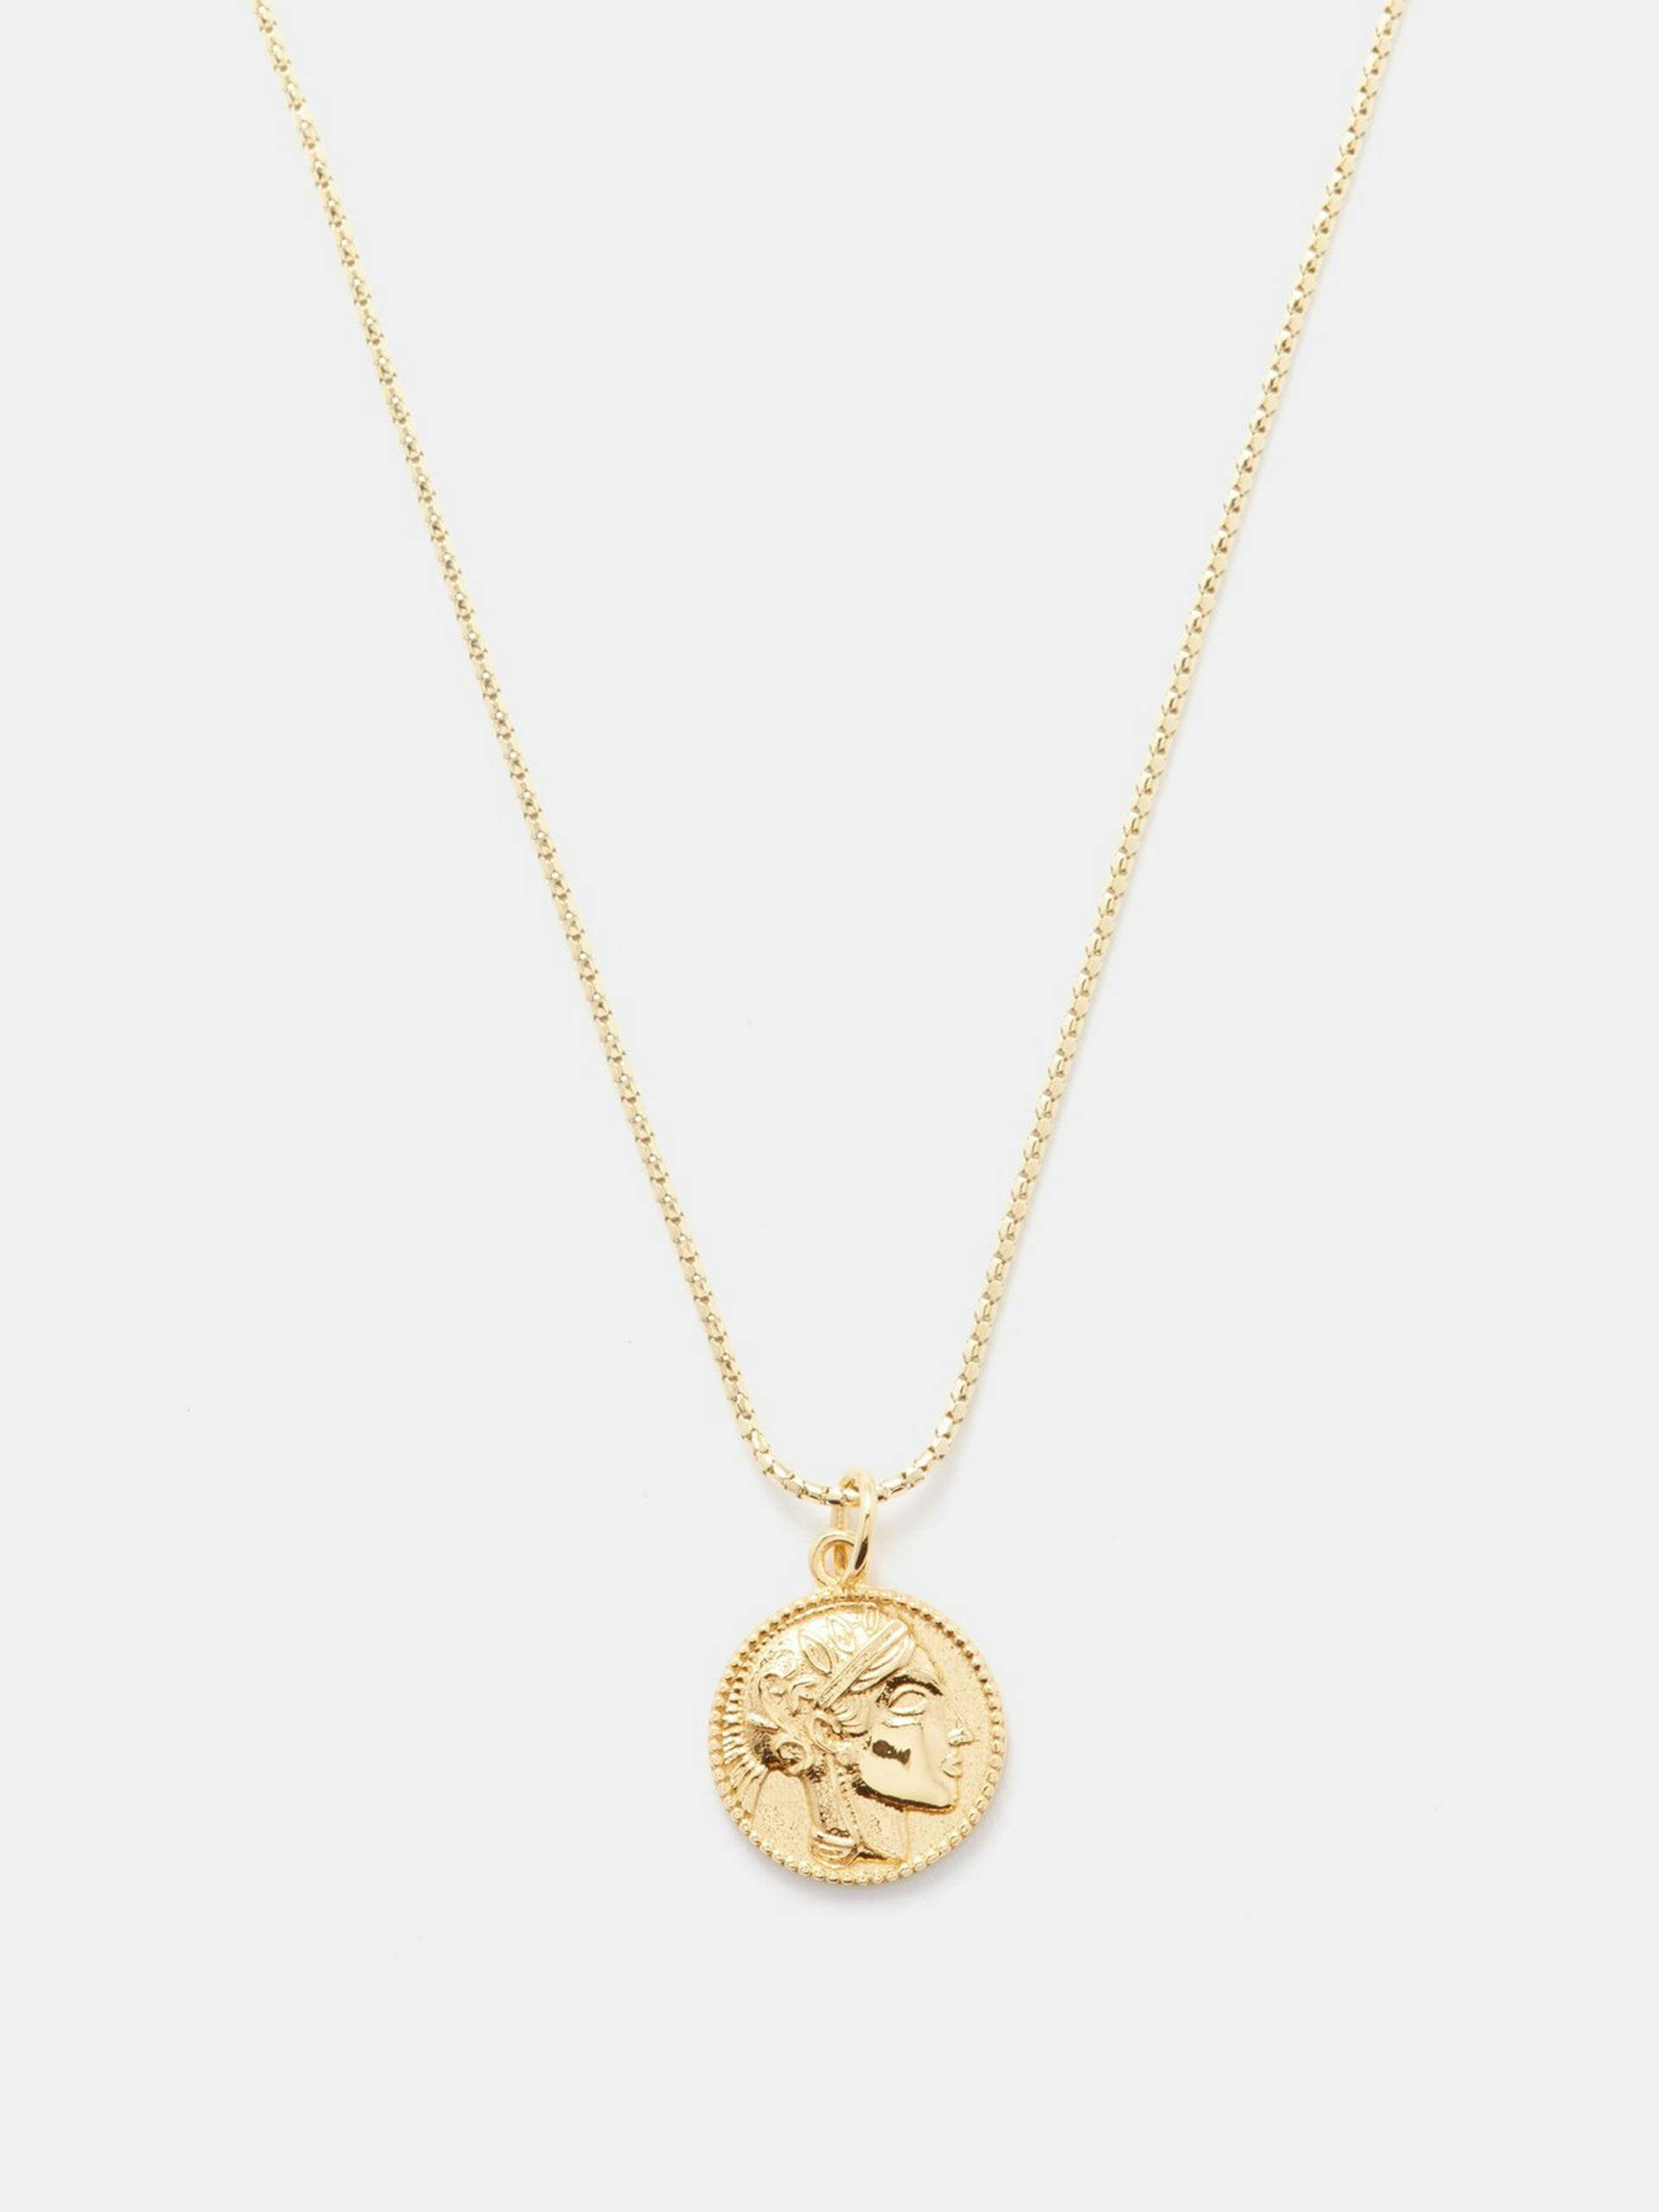 Gold plated coin charm necklace